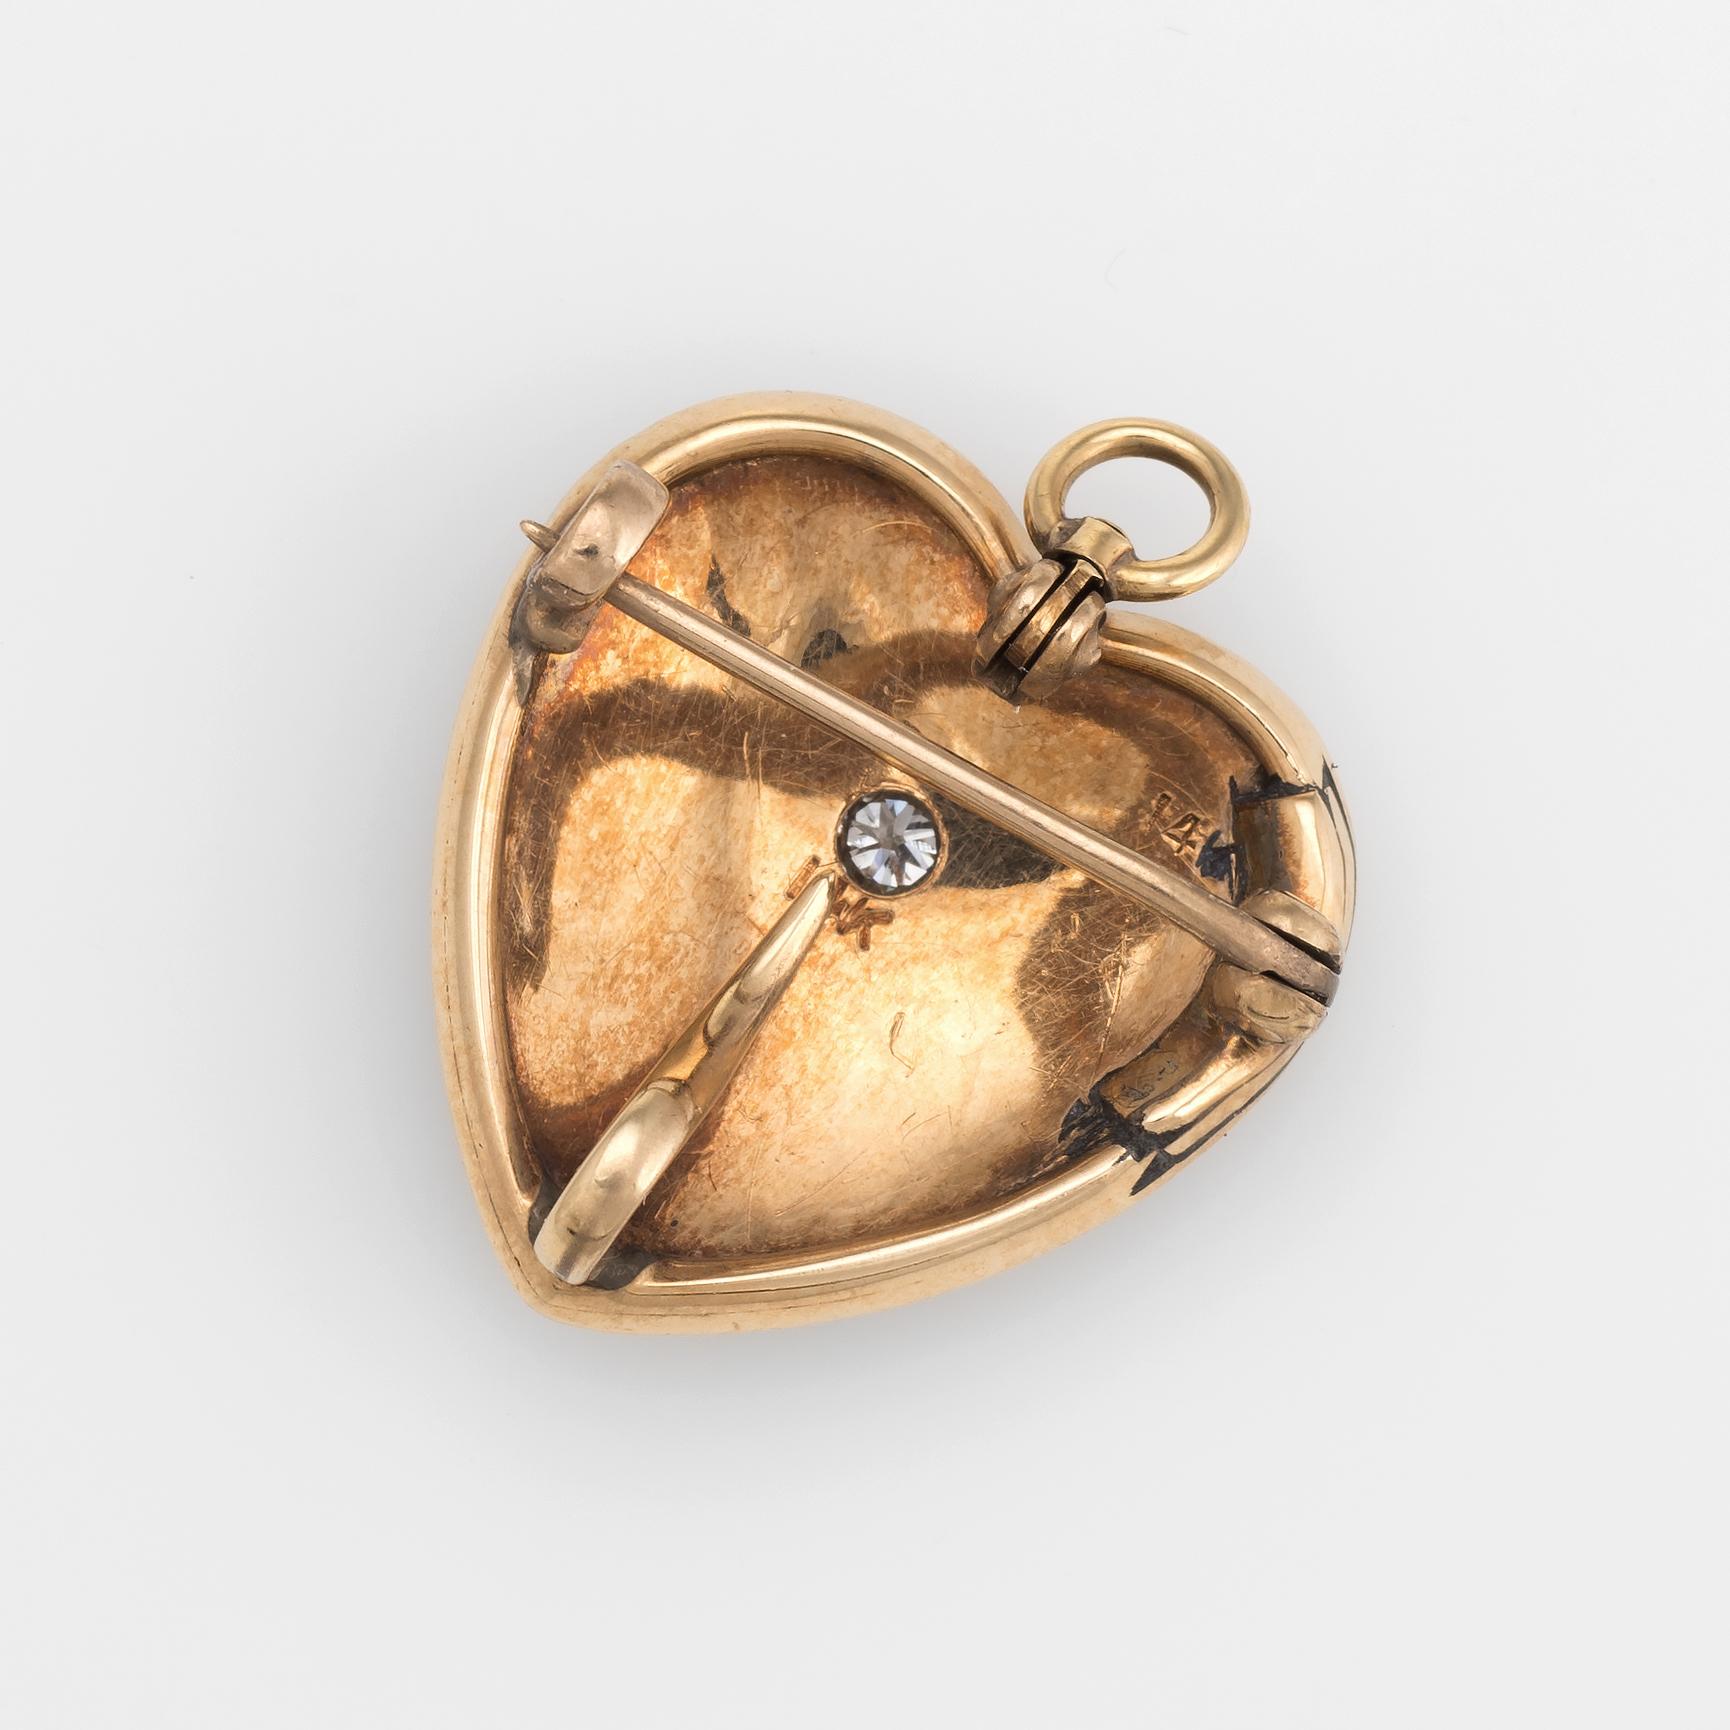 Elegant and finely detailed antique Victorian heart pendant & brooch (circa 1880s to 1900s), crafted in 14k rose gold. 

One estimated 0.06 carat old mine cut diamond adorns the center of the heart (estimated at H-I color and SI1 clarity). The seed